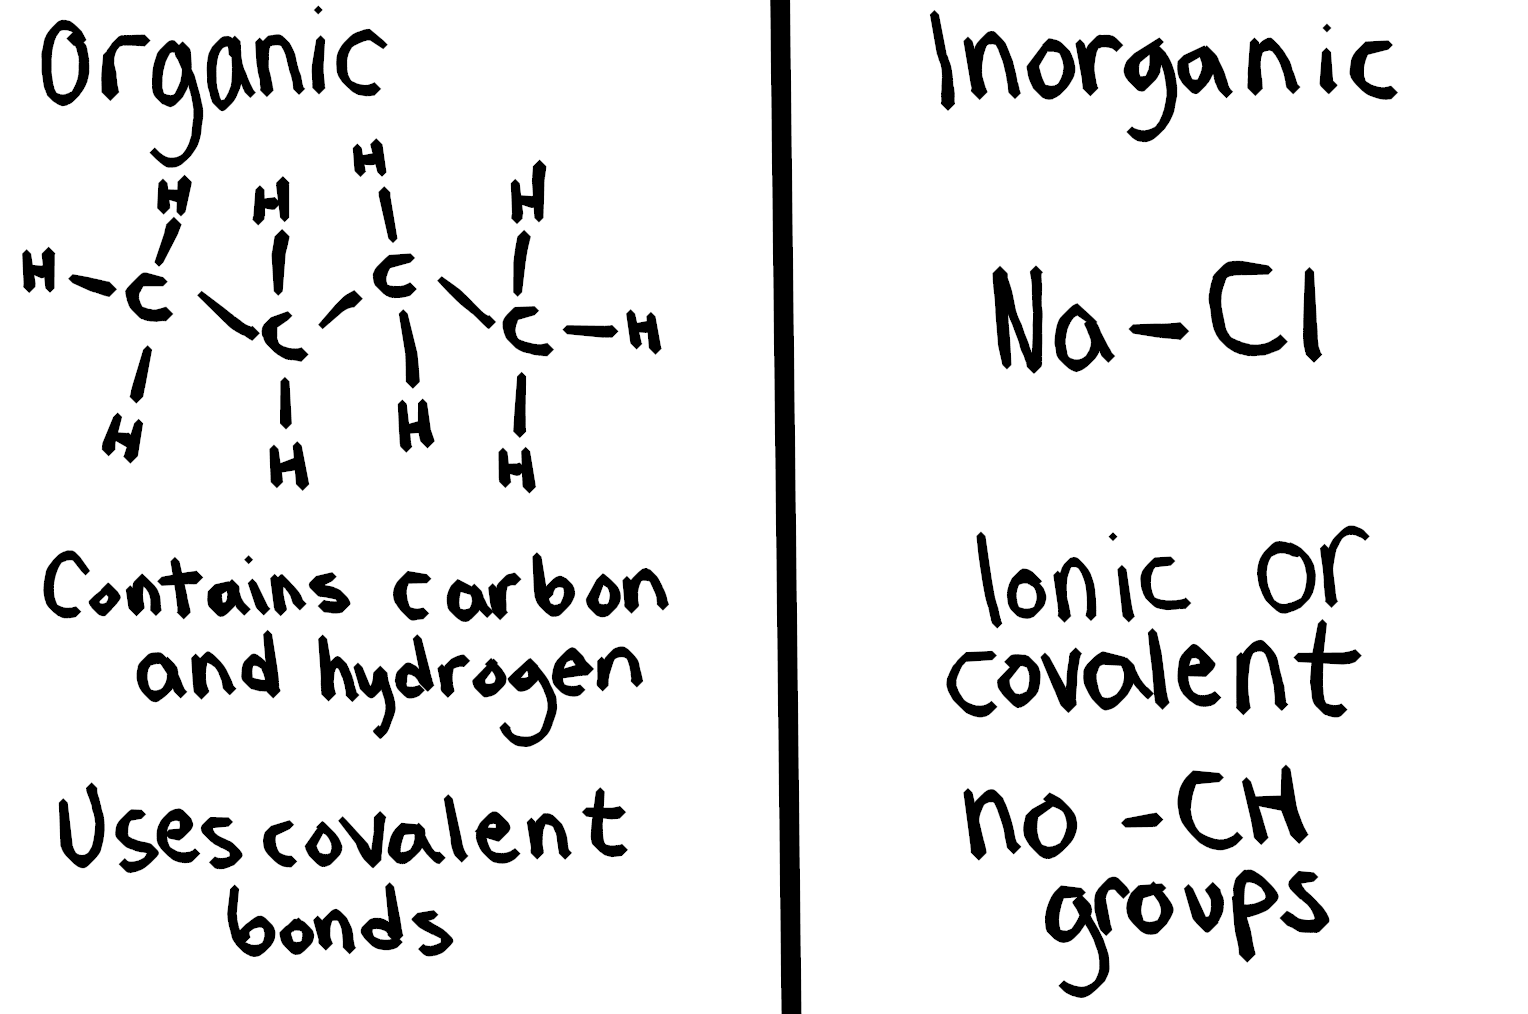 <p>organic compounds = mostly C and H (carbone backbone)</p><p>inorganic compound = substance dowsnt contain C and H (minerals and water)</p>